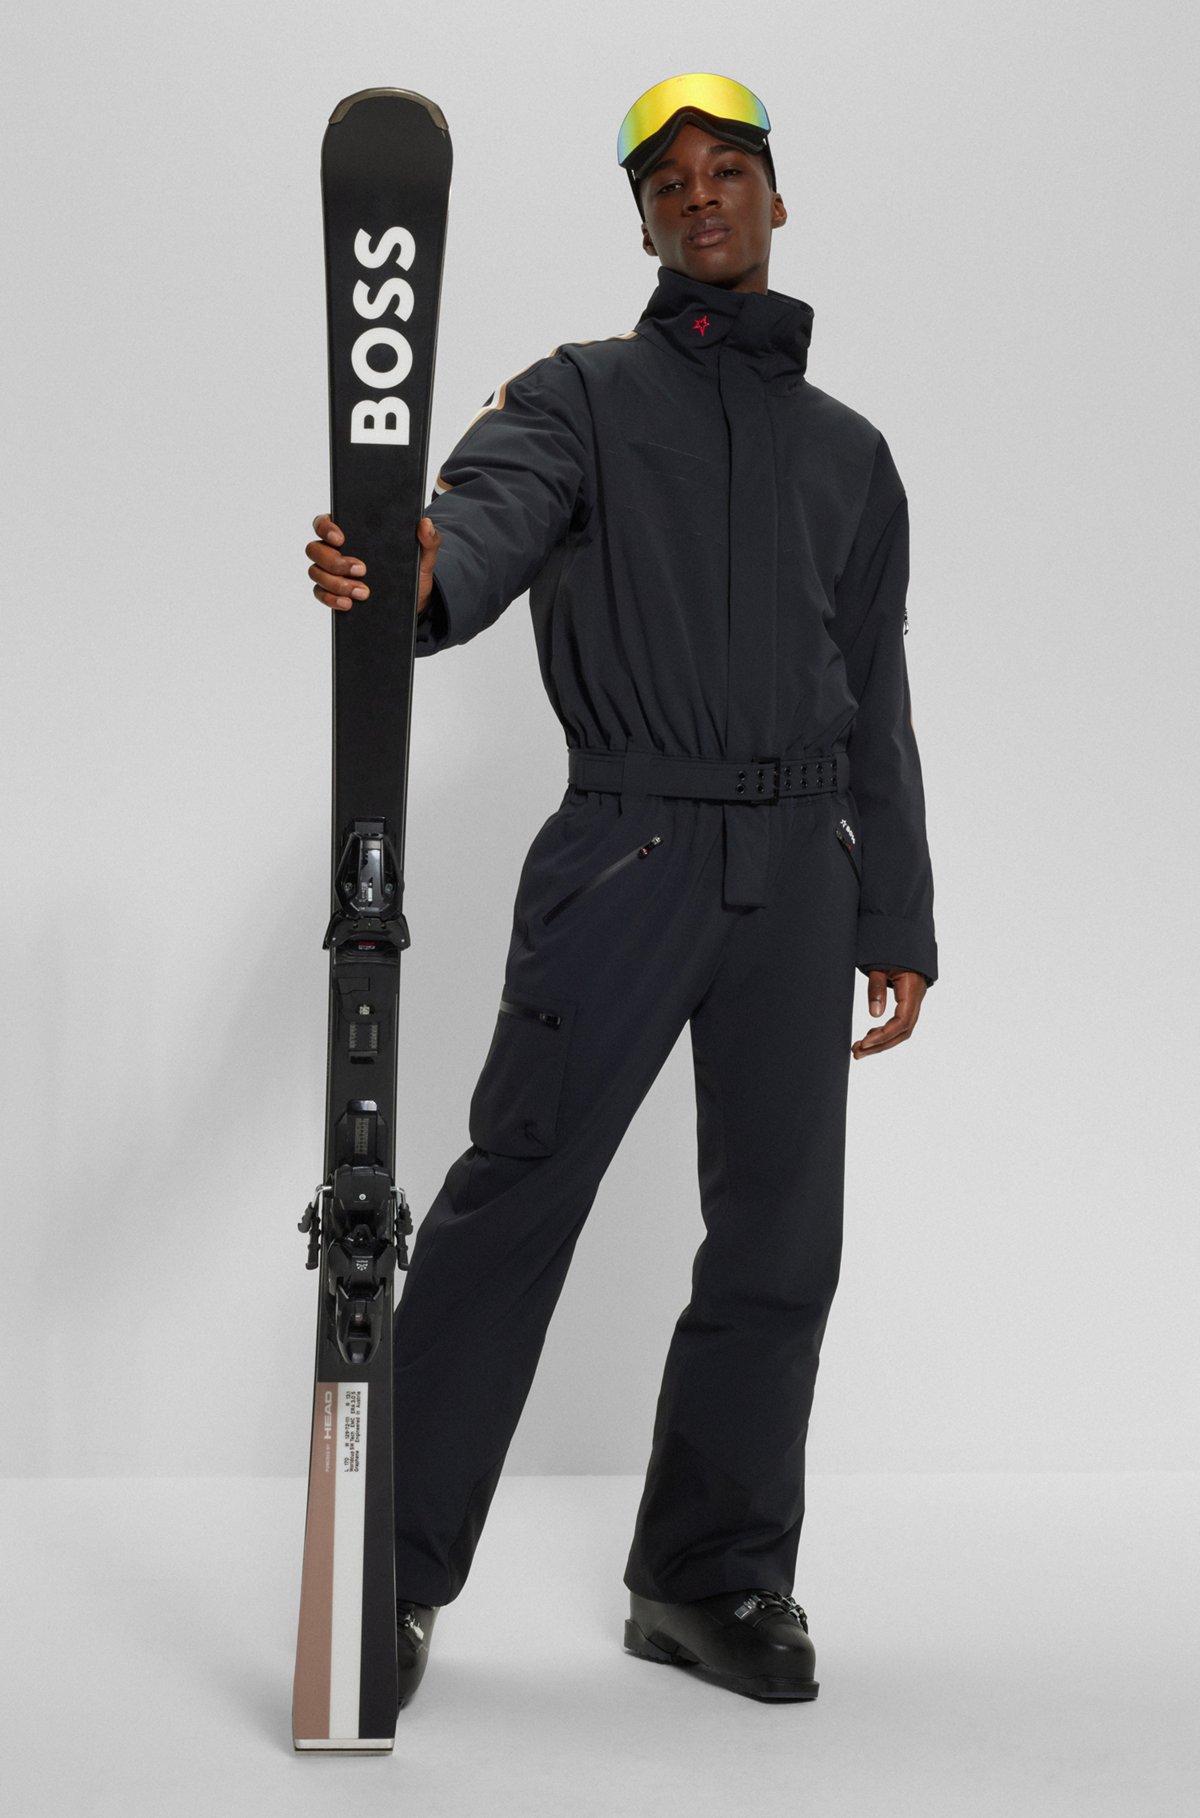 BOSS x Perfect Moment branded ski suit with stripes, Black